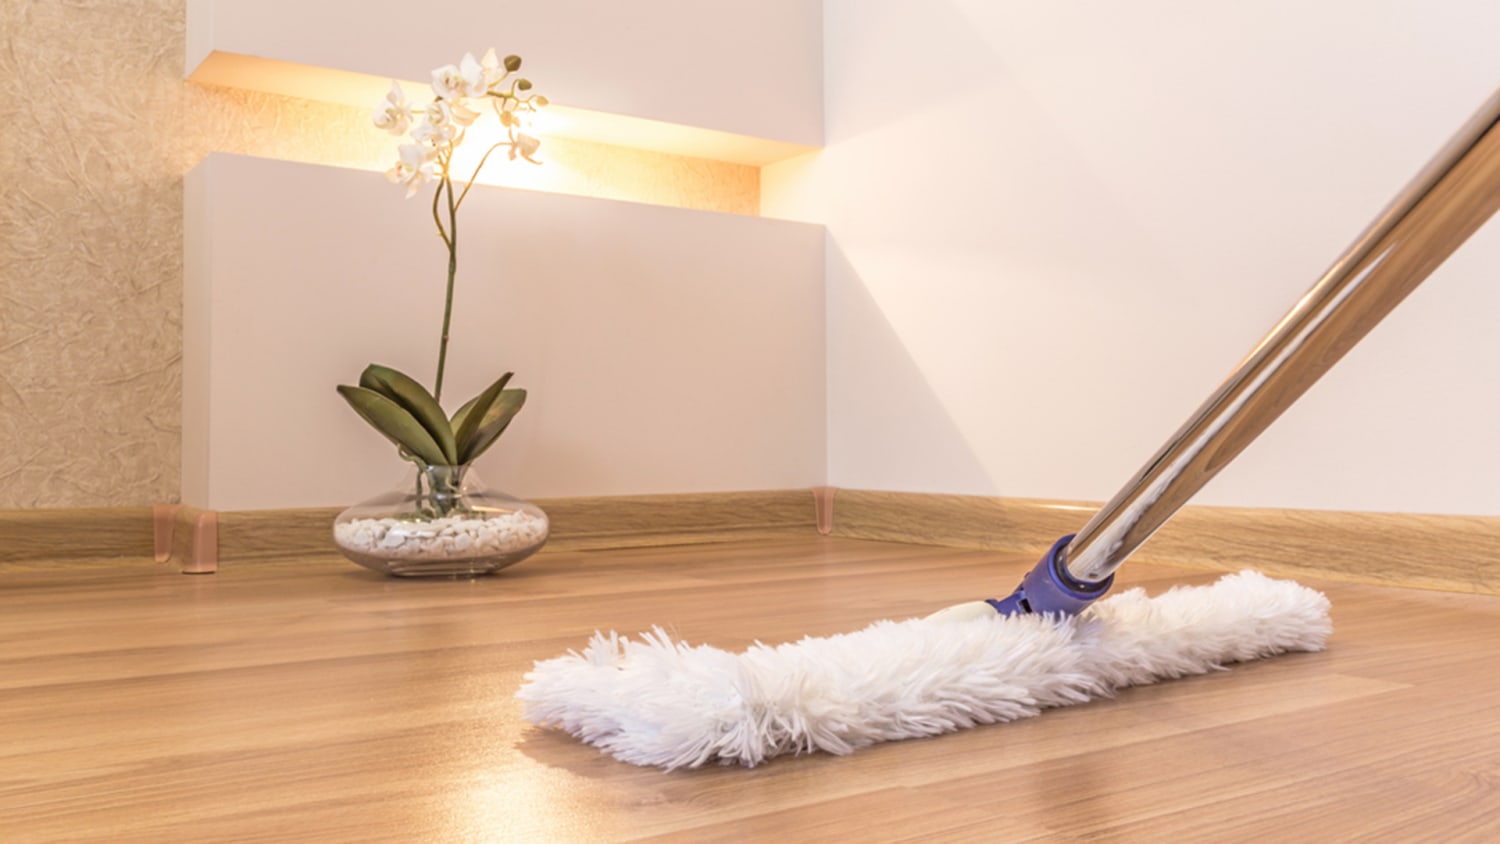 How To Clean Hardwood Floors The Right Way, Damp Mop For Hardwood Floors